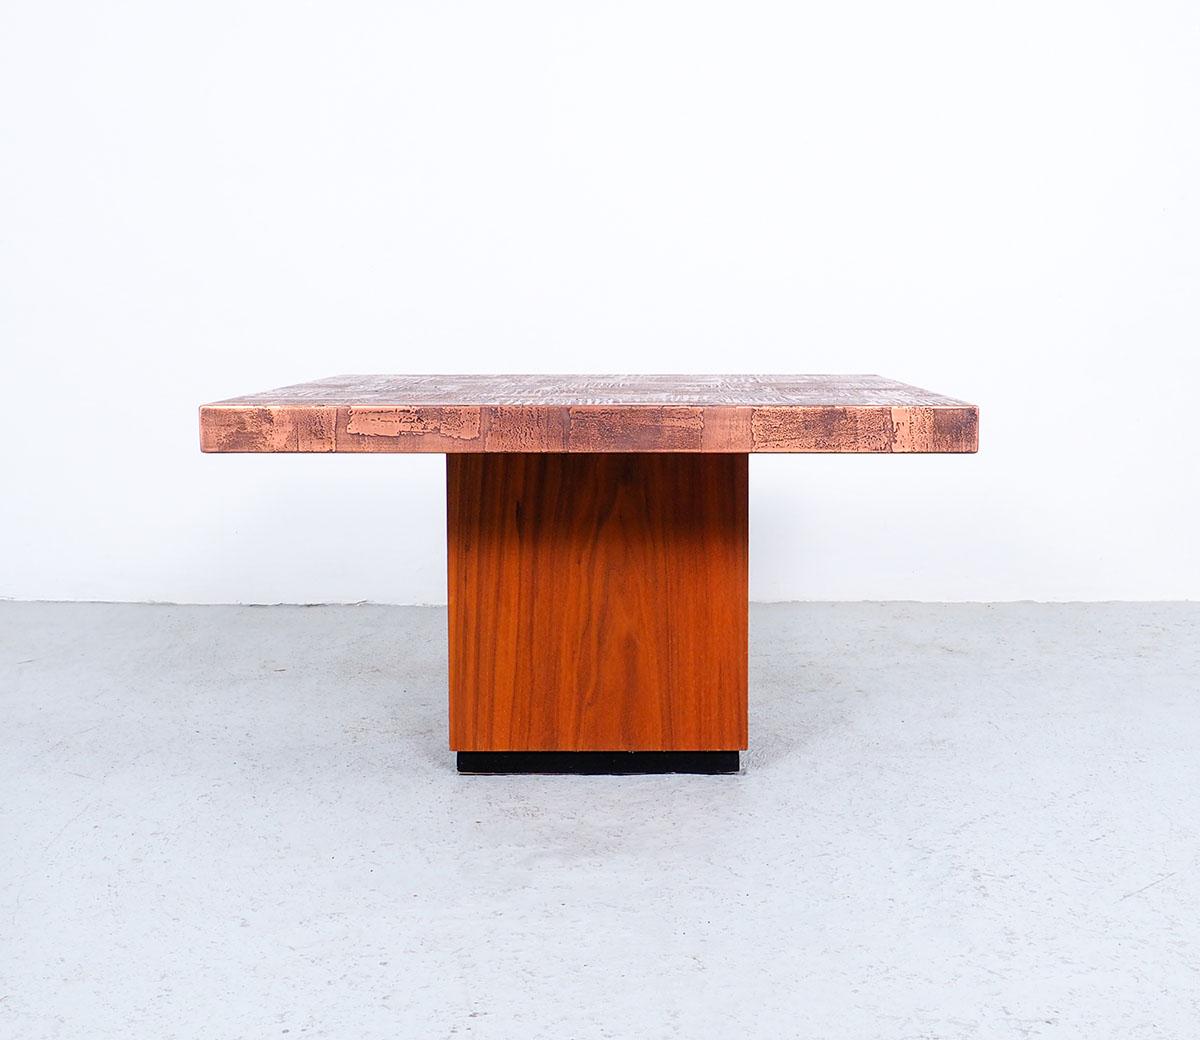 German Heinz Lilienthal Coffee Table in Copper and Teak, 1970s For Sale